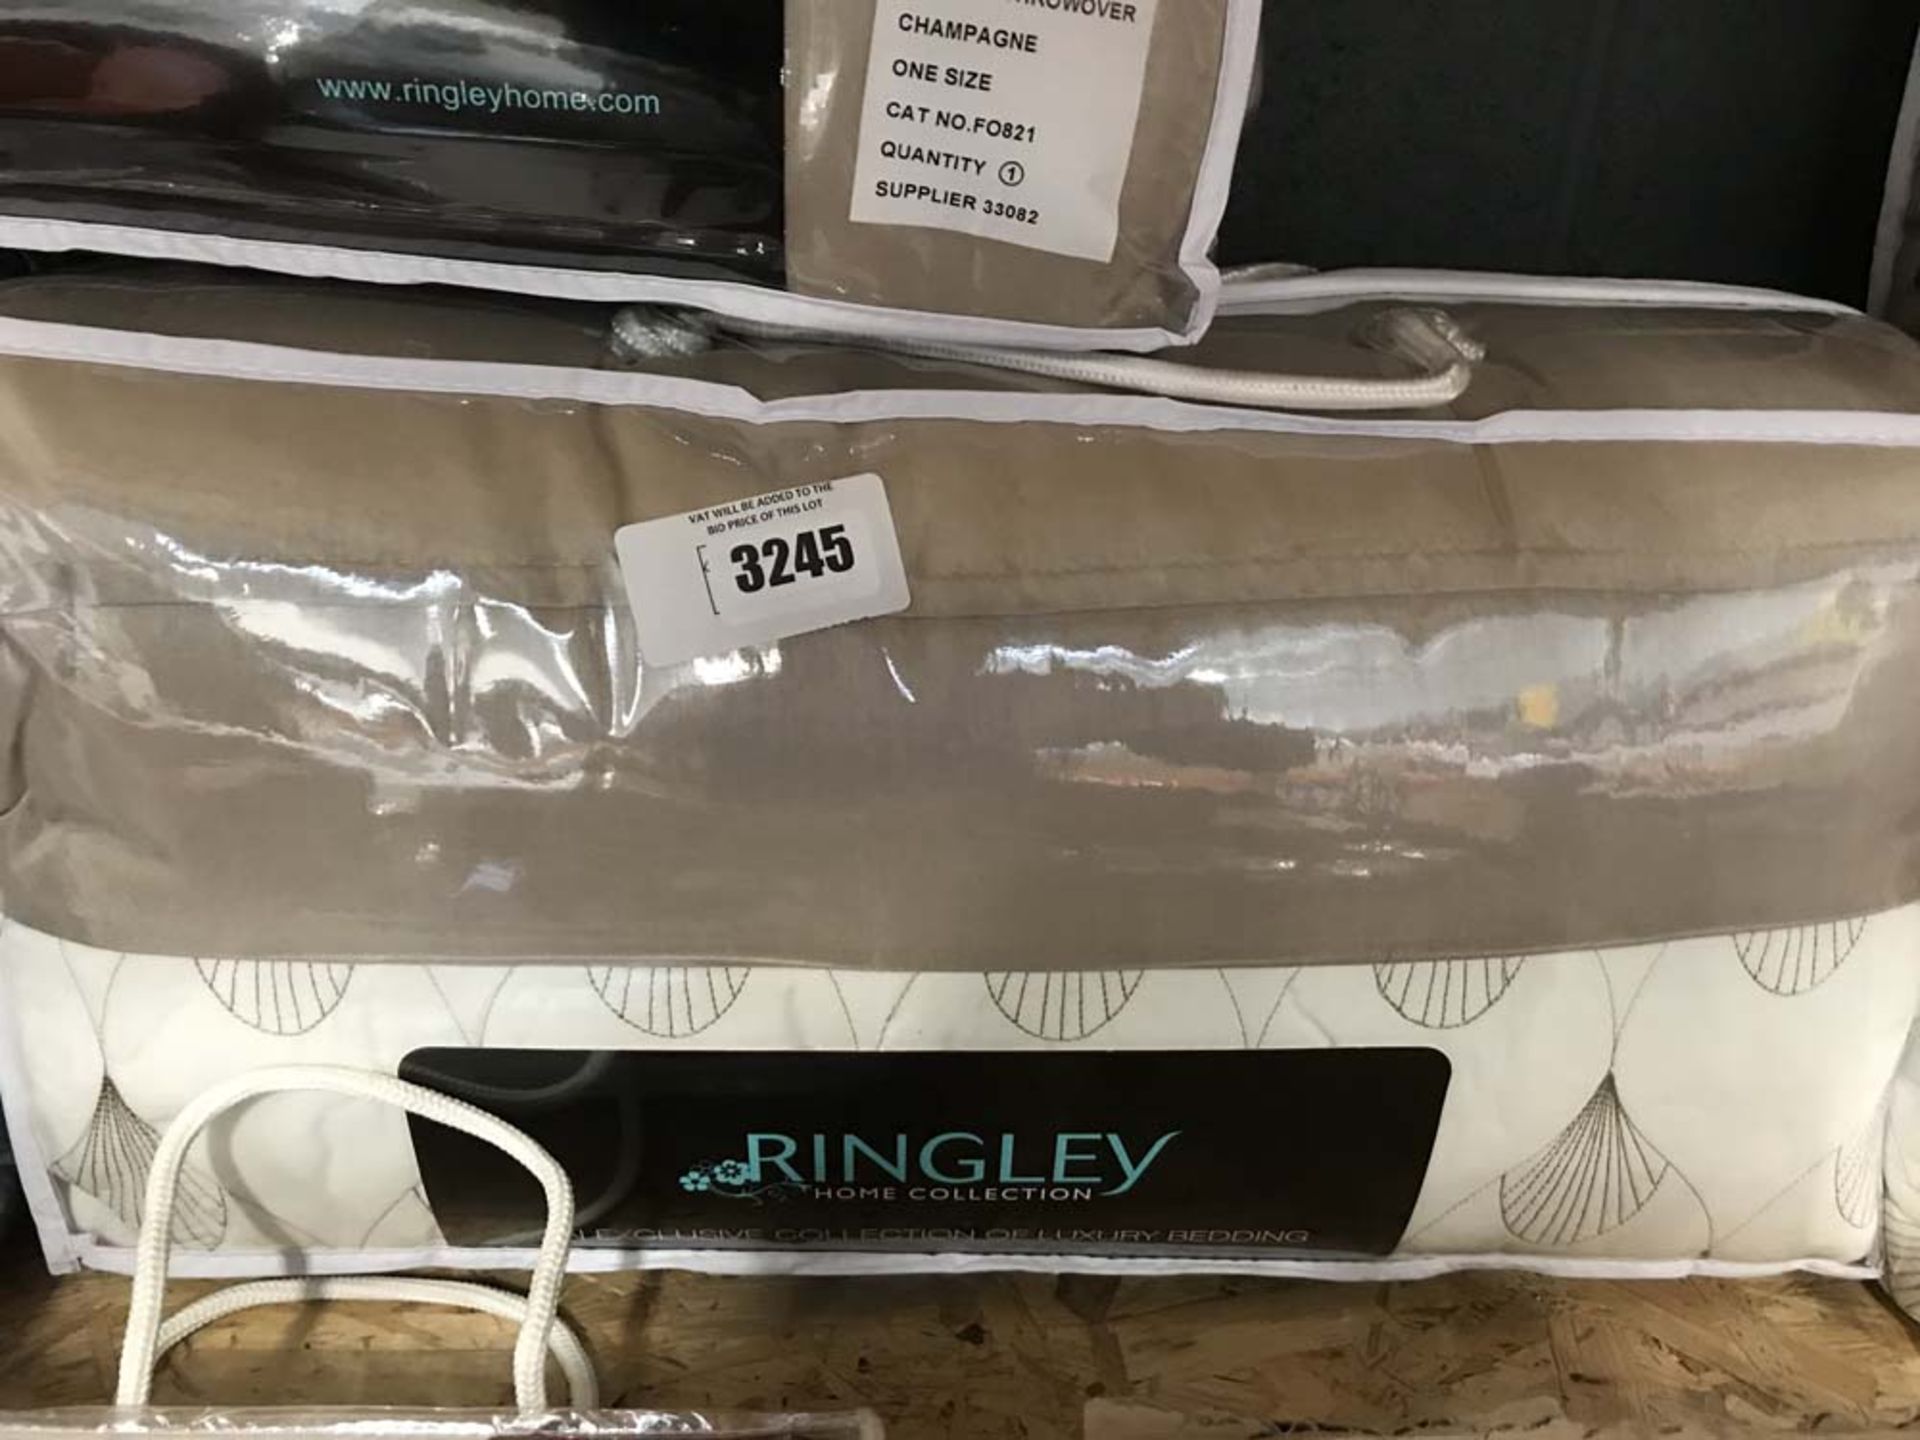 Rigeley Home Collection luxury bedding set